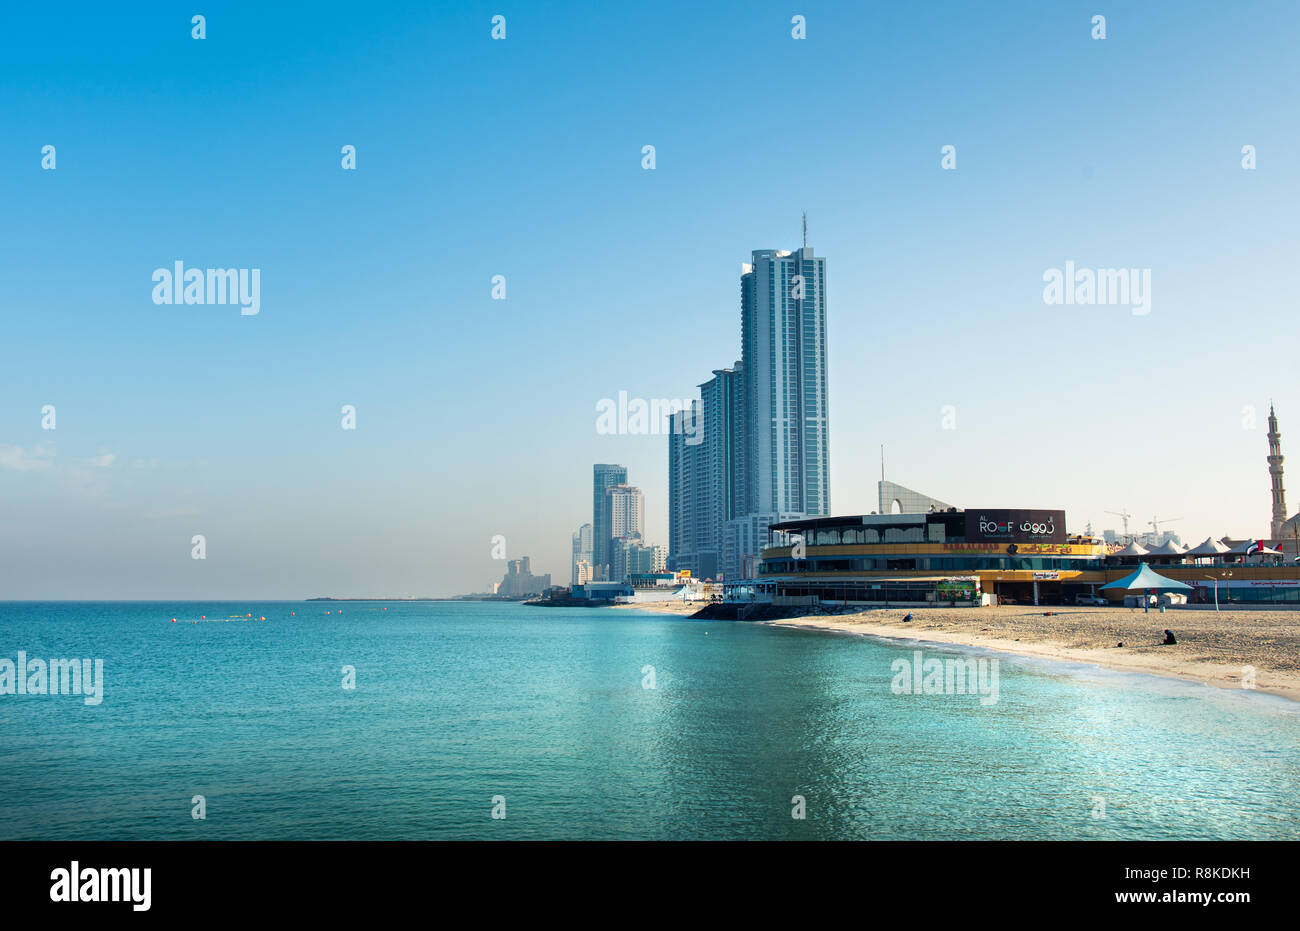 Ajman, United Arab Emirates - December 6, 2018: Ajman Corniche Beach beautiful coast in the city downtown area surrounded by high residential building Stock Photo